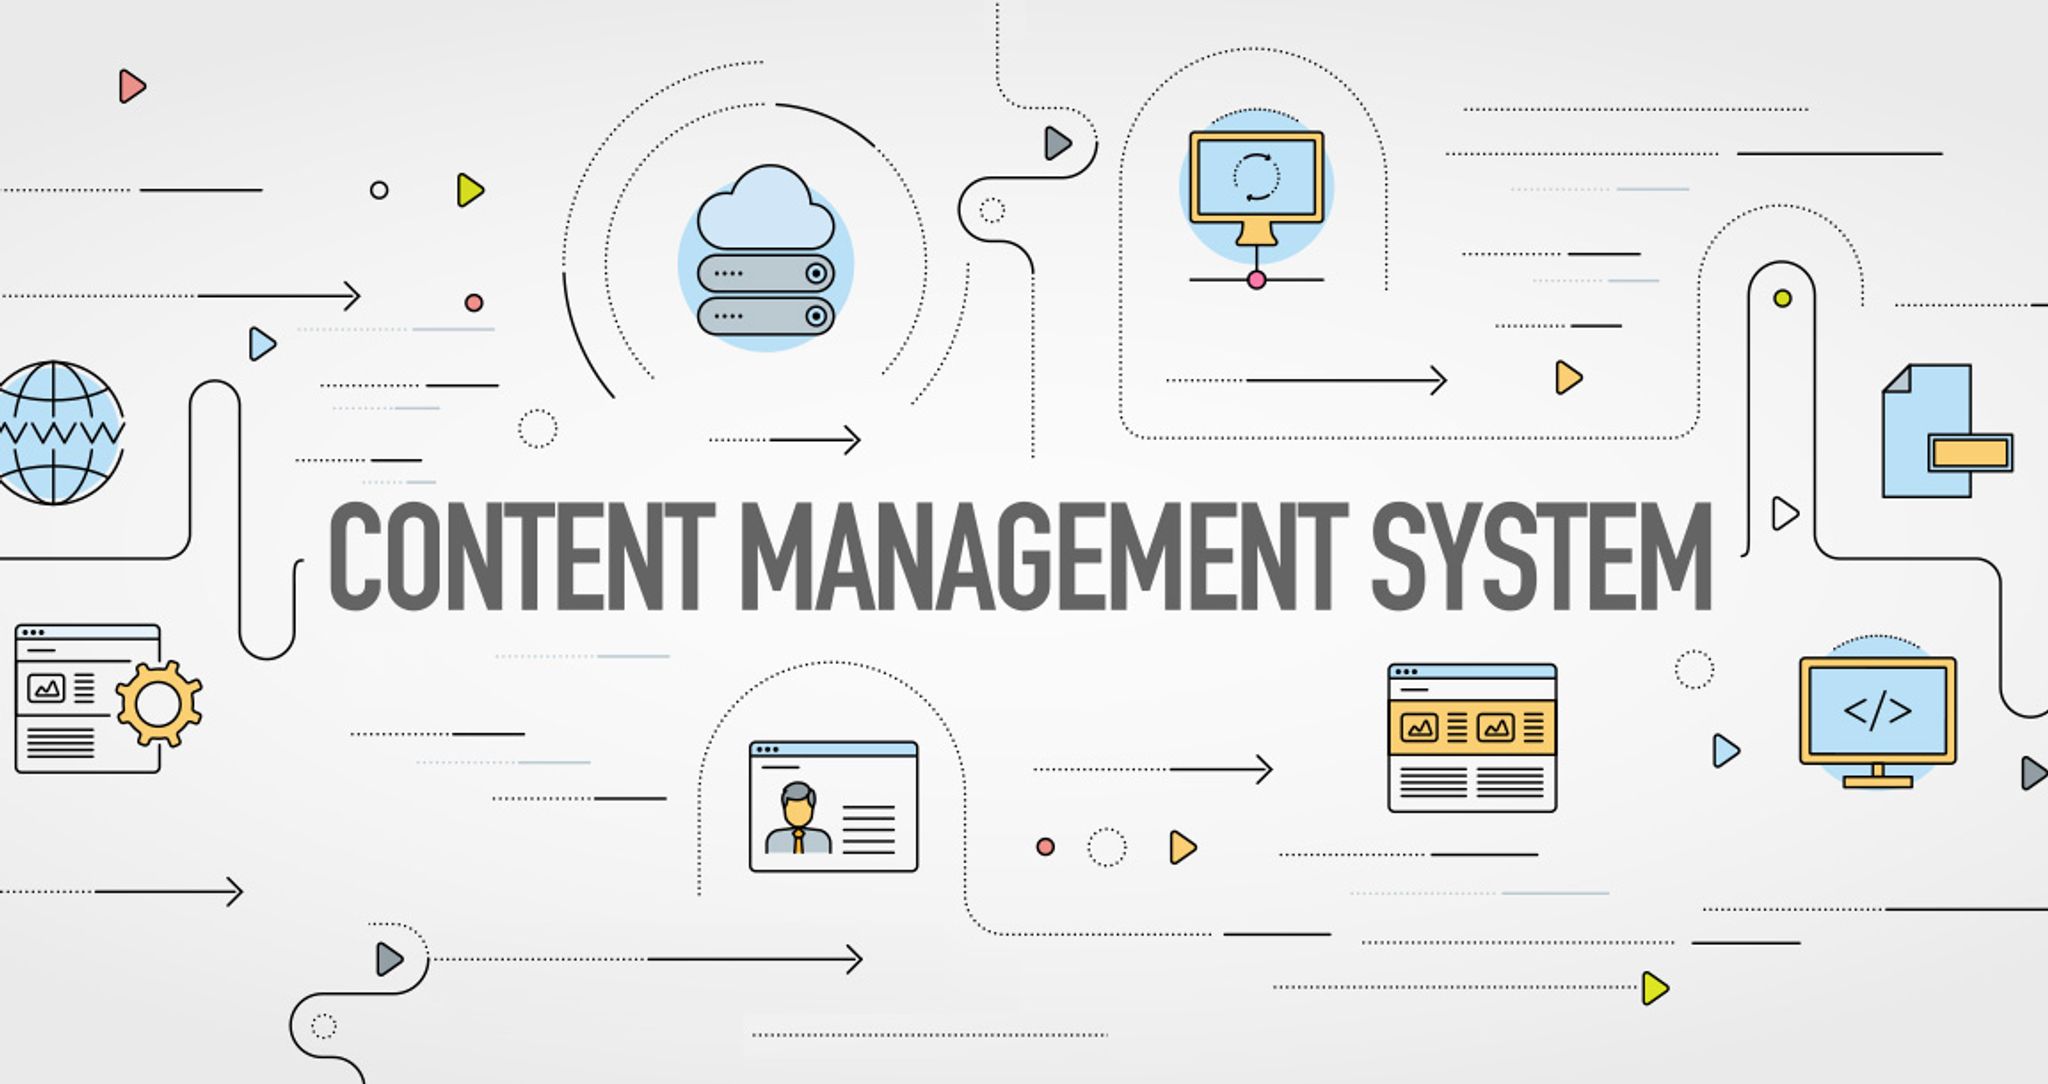 Content Management System with flow charts